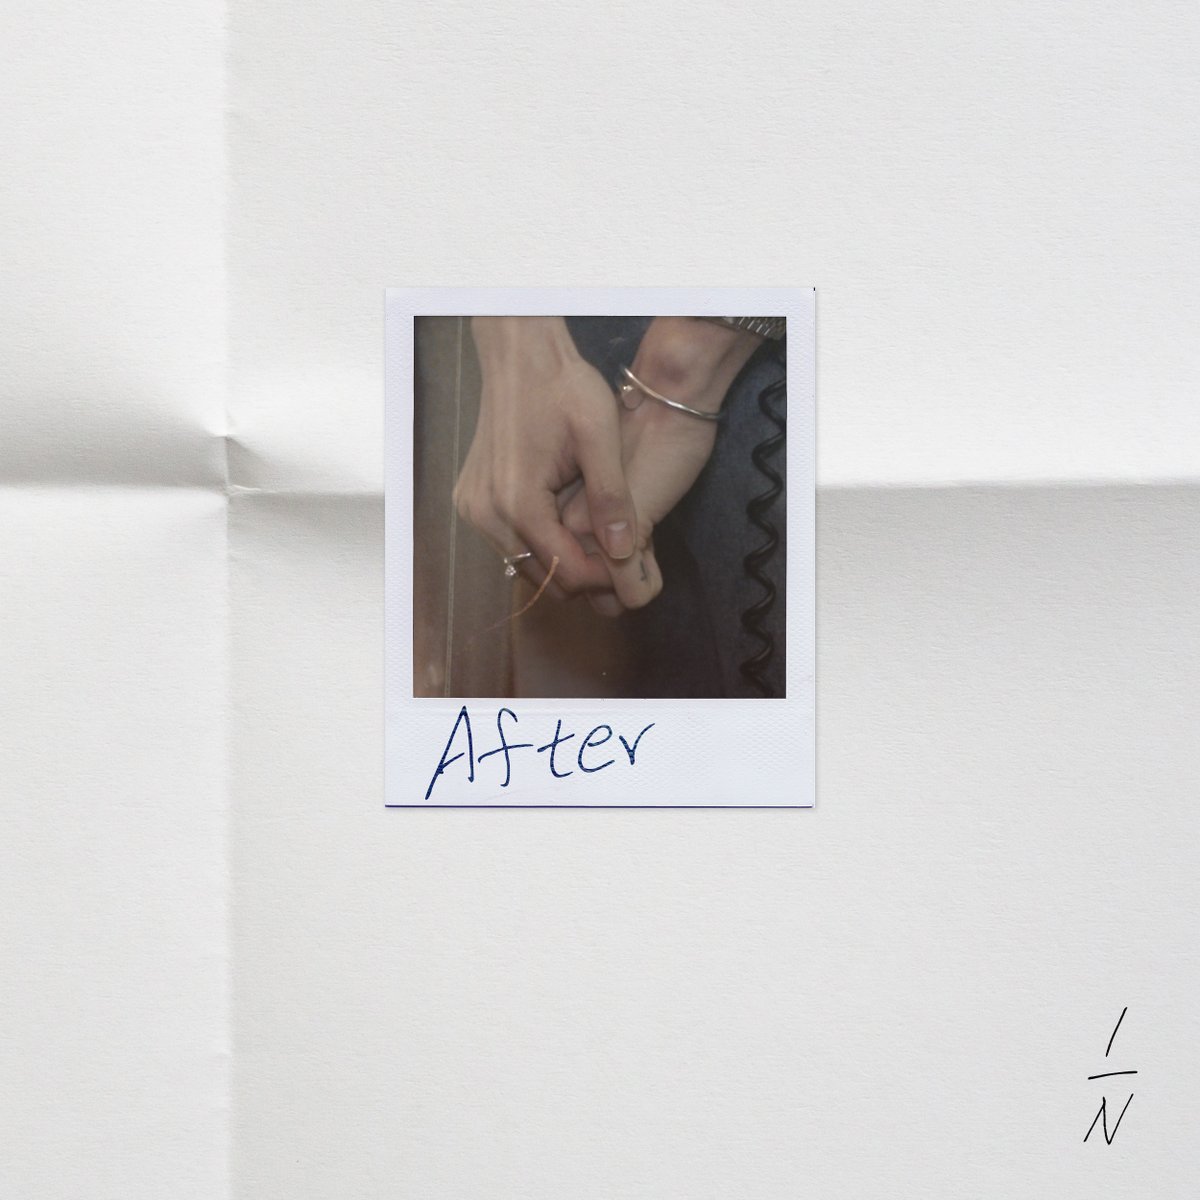 [☁] 0221 After by NEW 🎶 soundcloud.com/official_thebo… #THEBOYZ #더보이즈 #NEW #뉴 #After